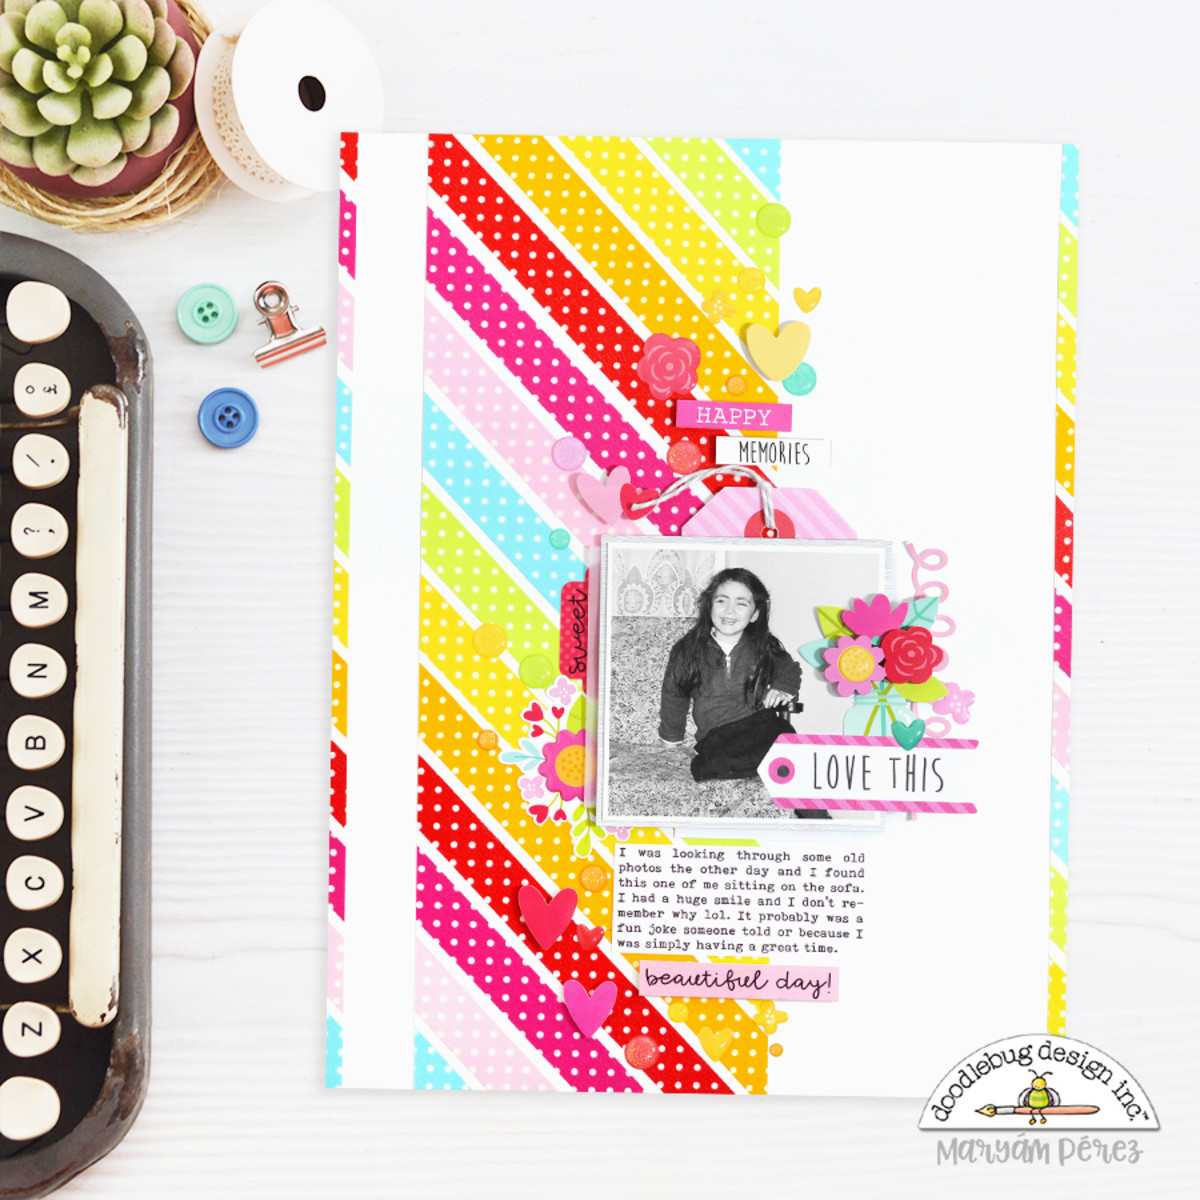 Washi tape can be used to create colorful borders and focal points.